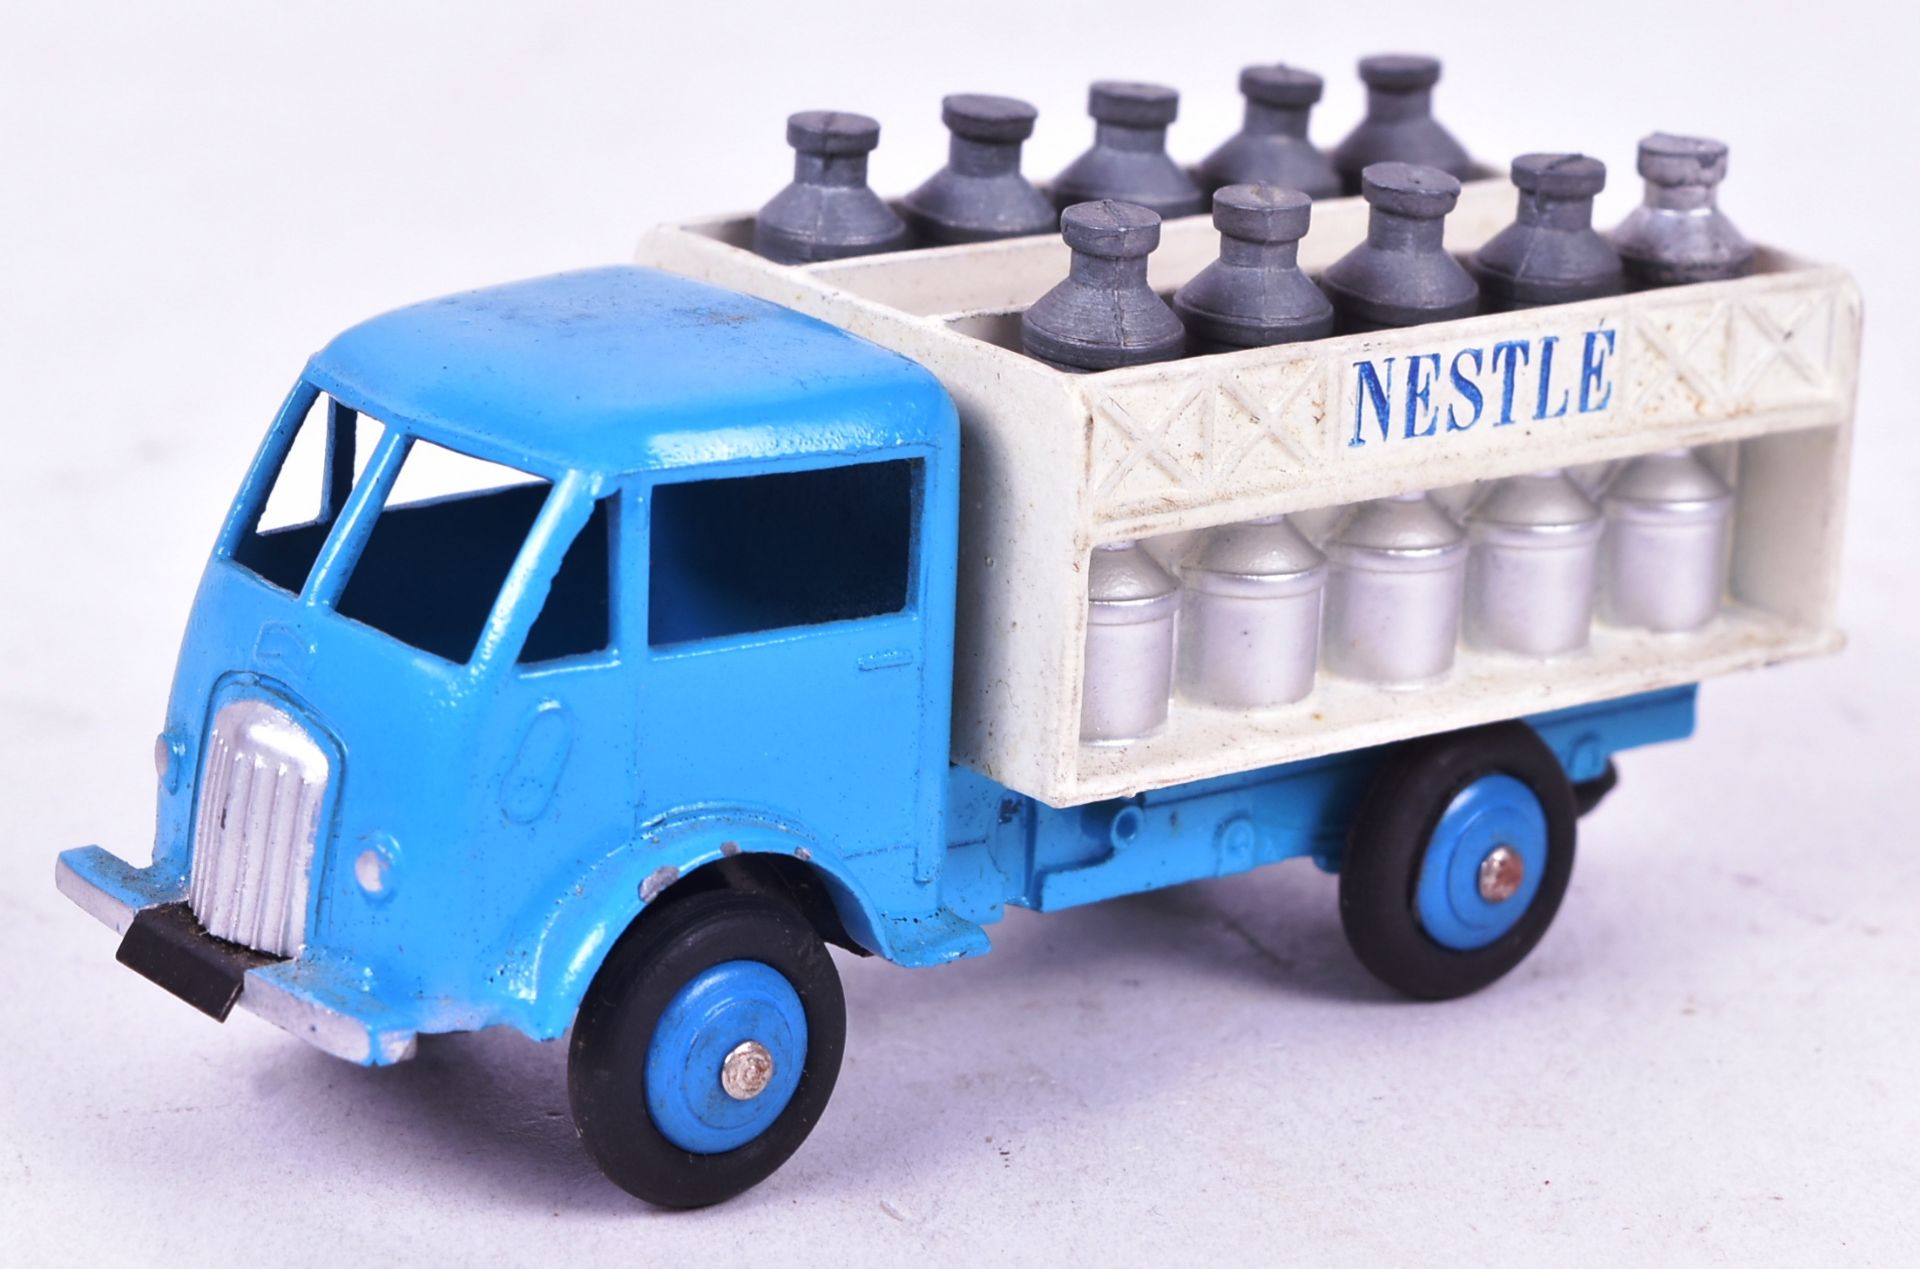 DIECAST - FRENCH DINKY TOYS - NESTLE DAIRY TRUCK - Image 2 of 7